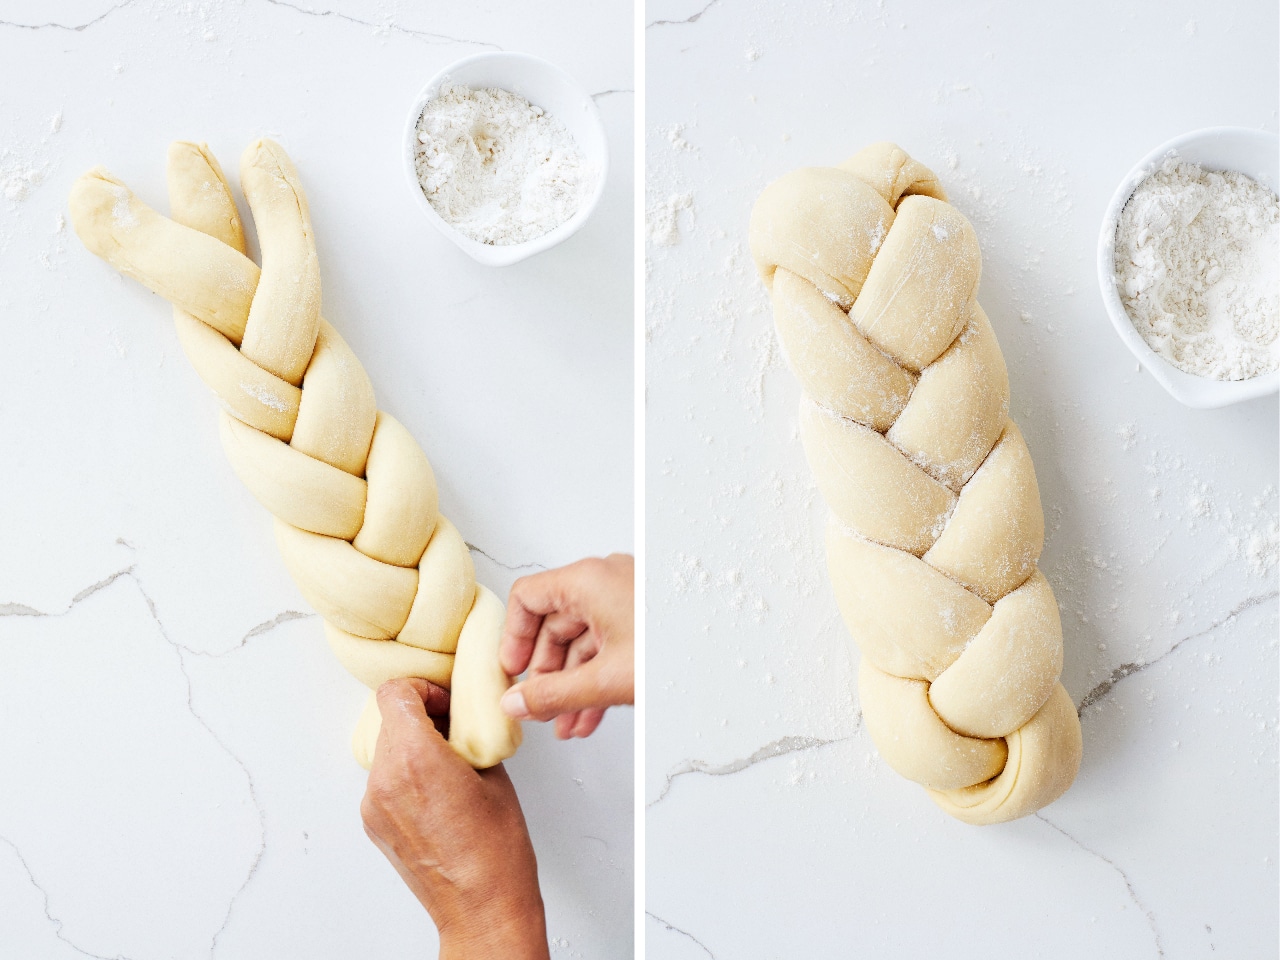 A side-by-side photo shows the ends of Challah bread being pinched together and a finished, uncooked loaf.